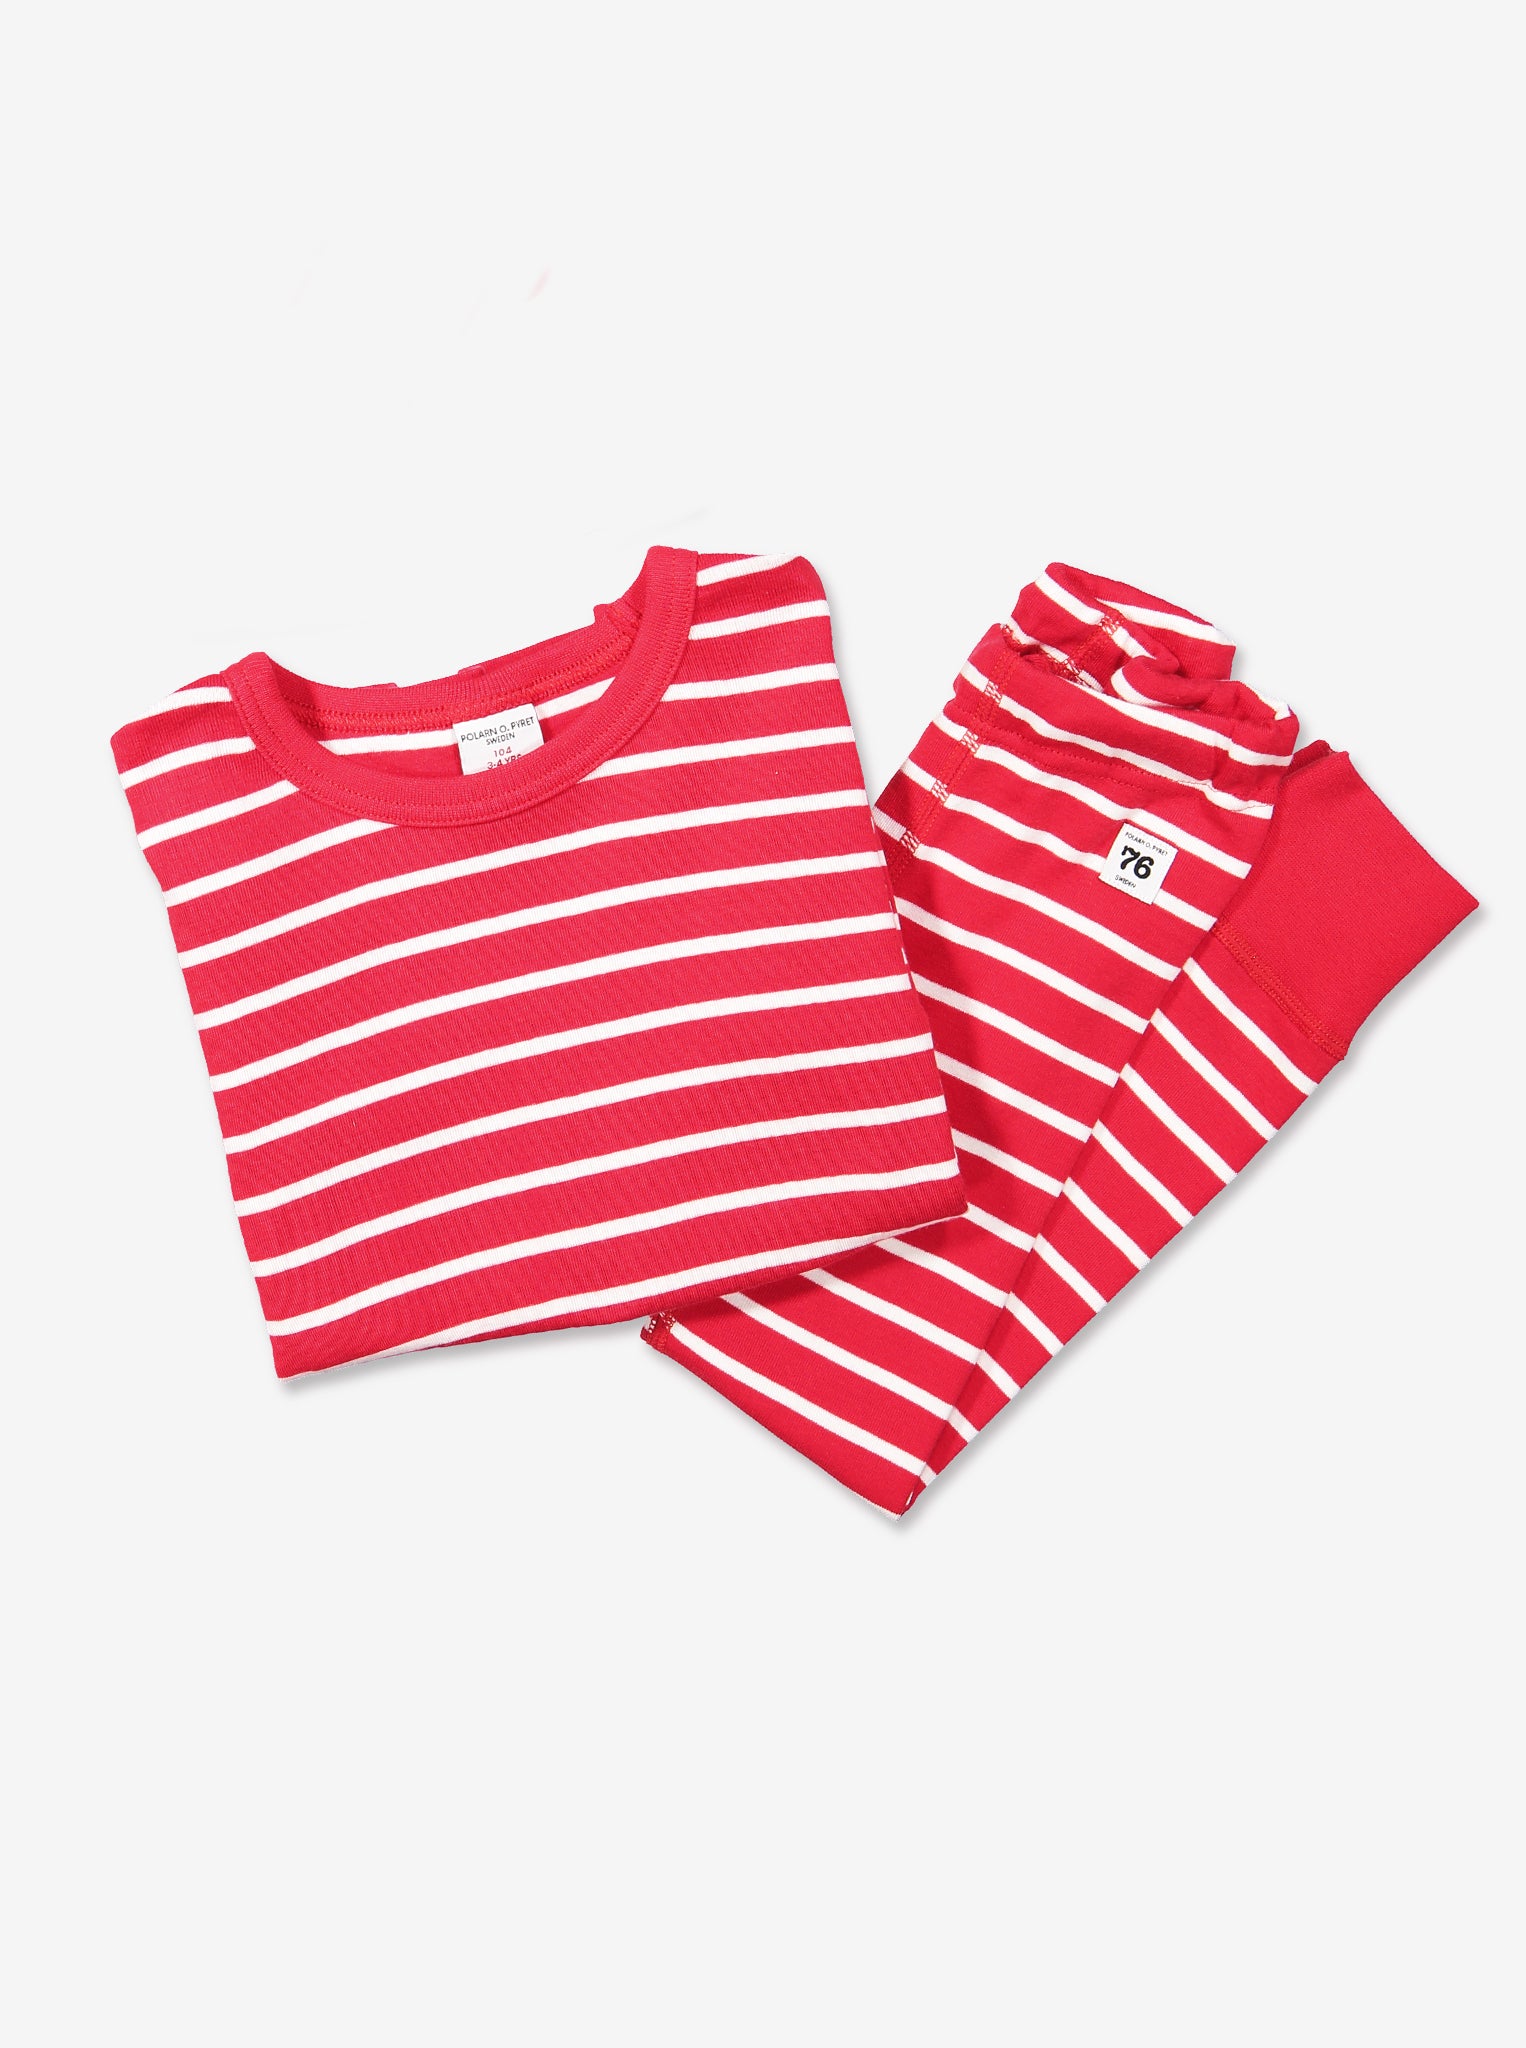 adults top and bottoms, red and white stripes, organic cotton ethical quality, polarn o. pyret 